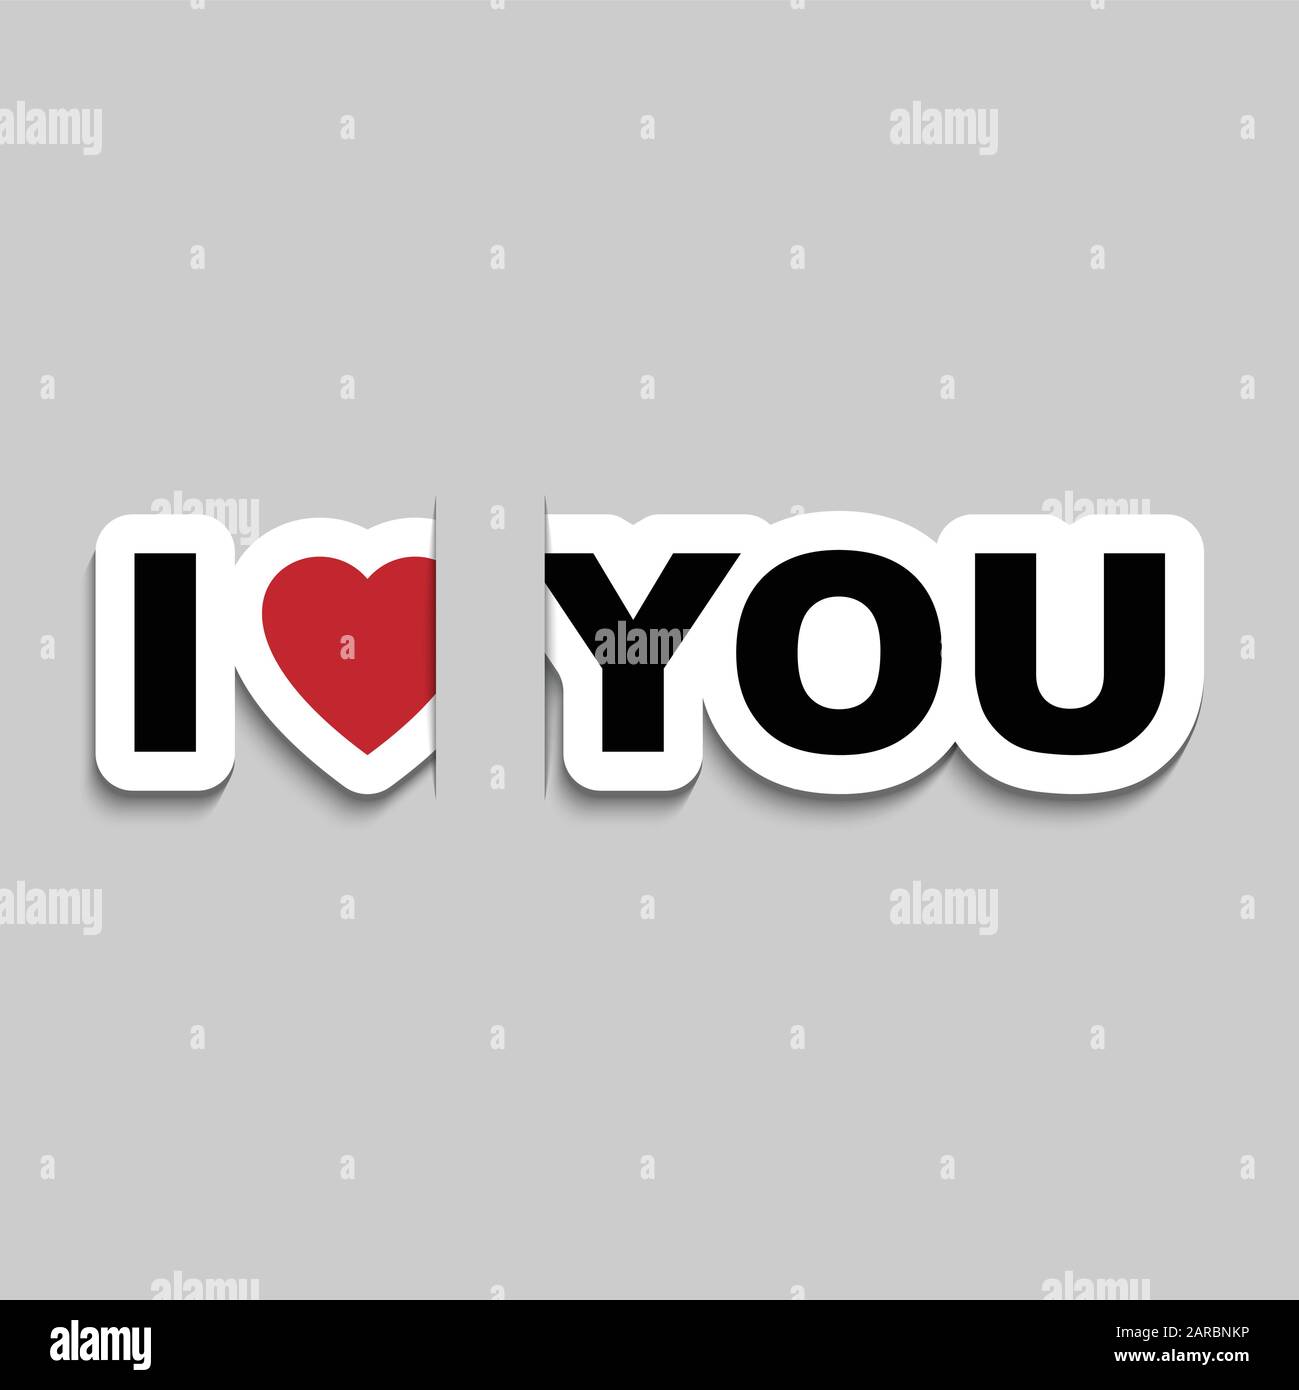 I love you lettering made as sticker design, vector illustration for Valentines day Stock Vector